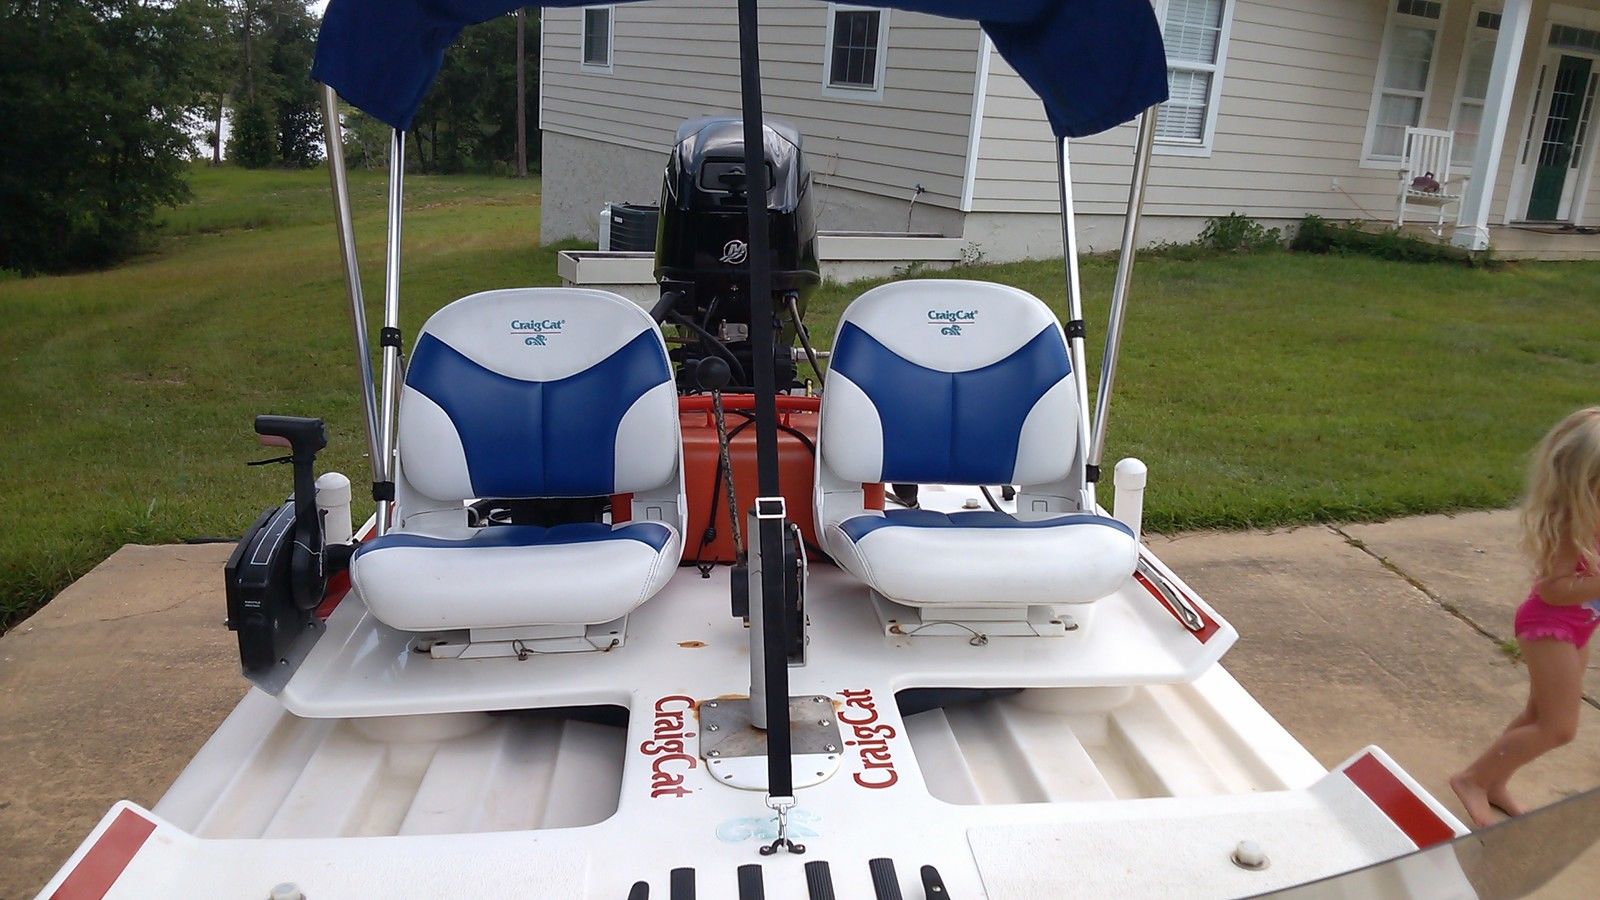 Used Bass Cat Boats For Sale On Craigslist